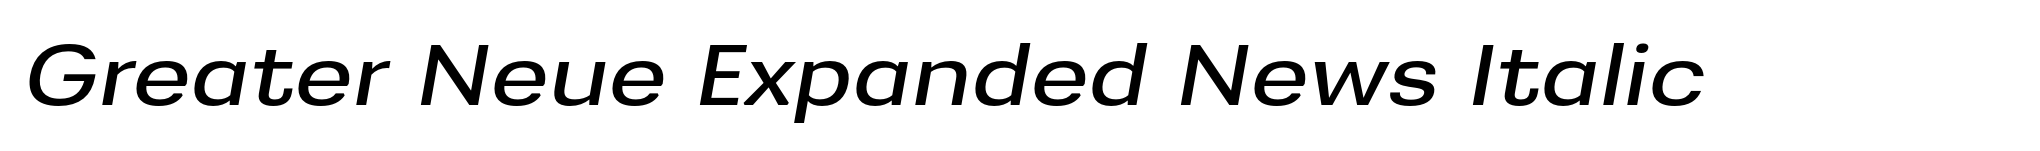 Greater Neue Expanded News Italic image